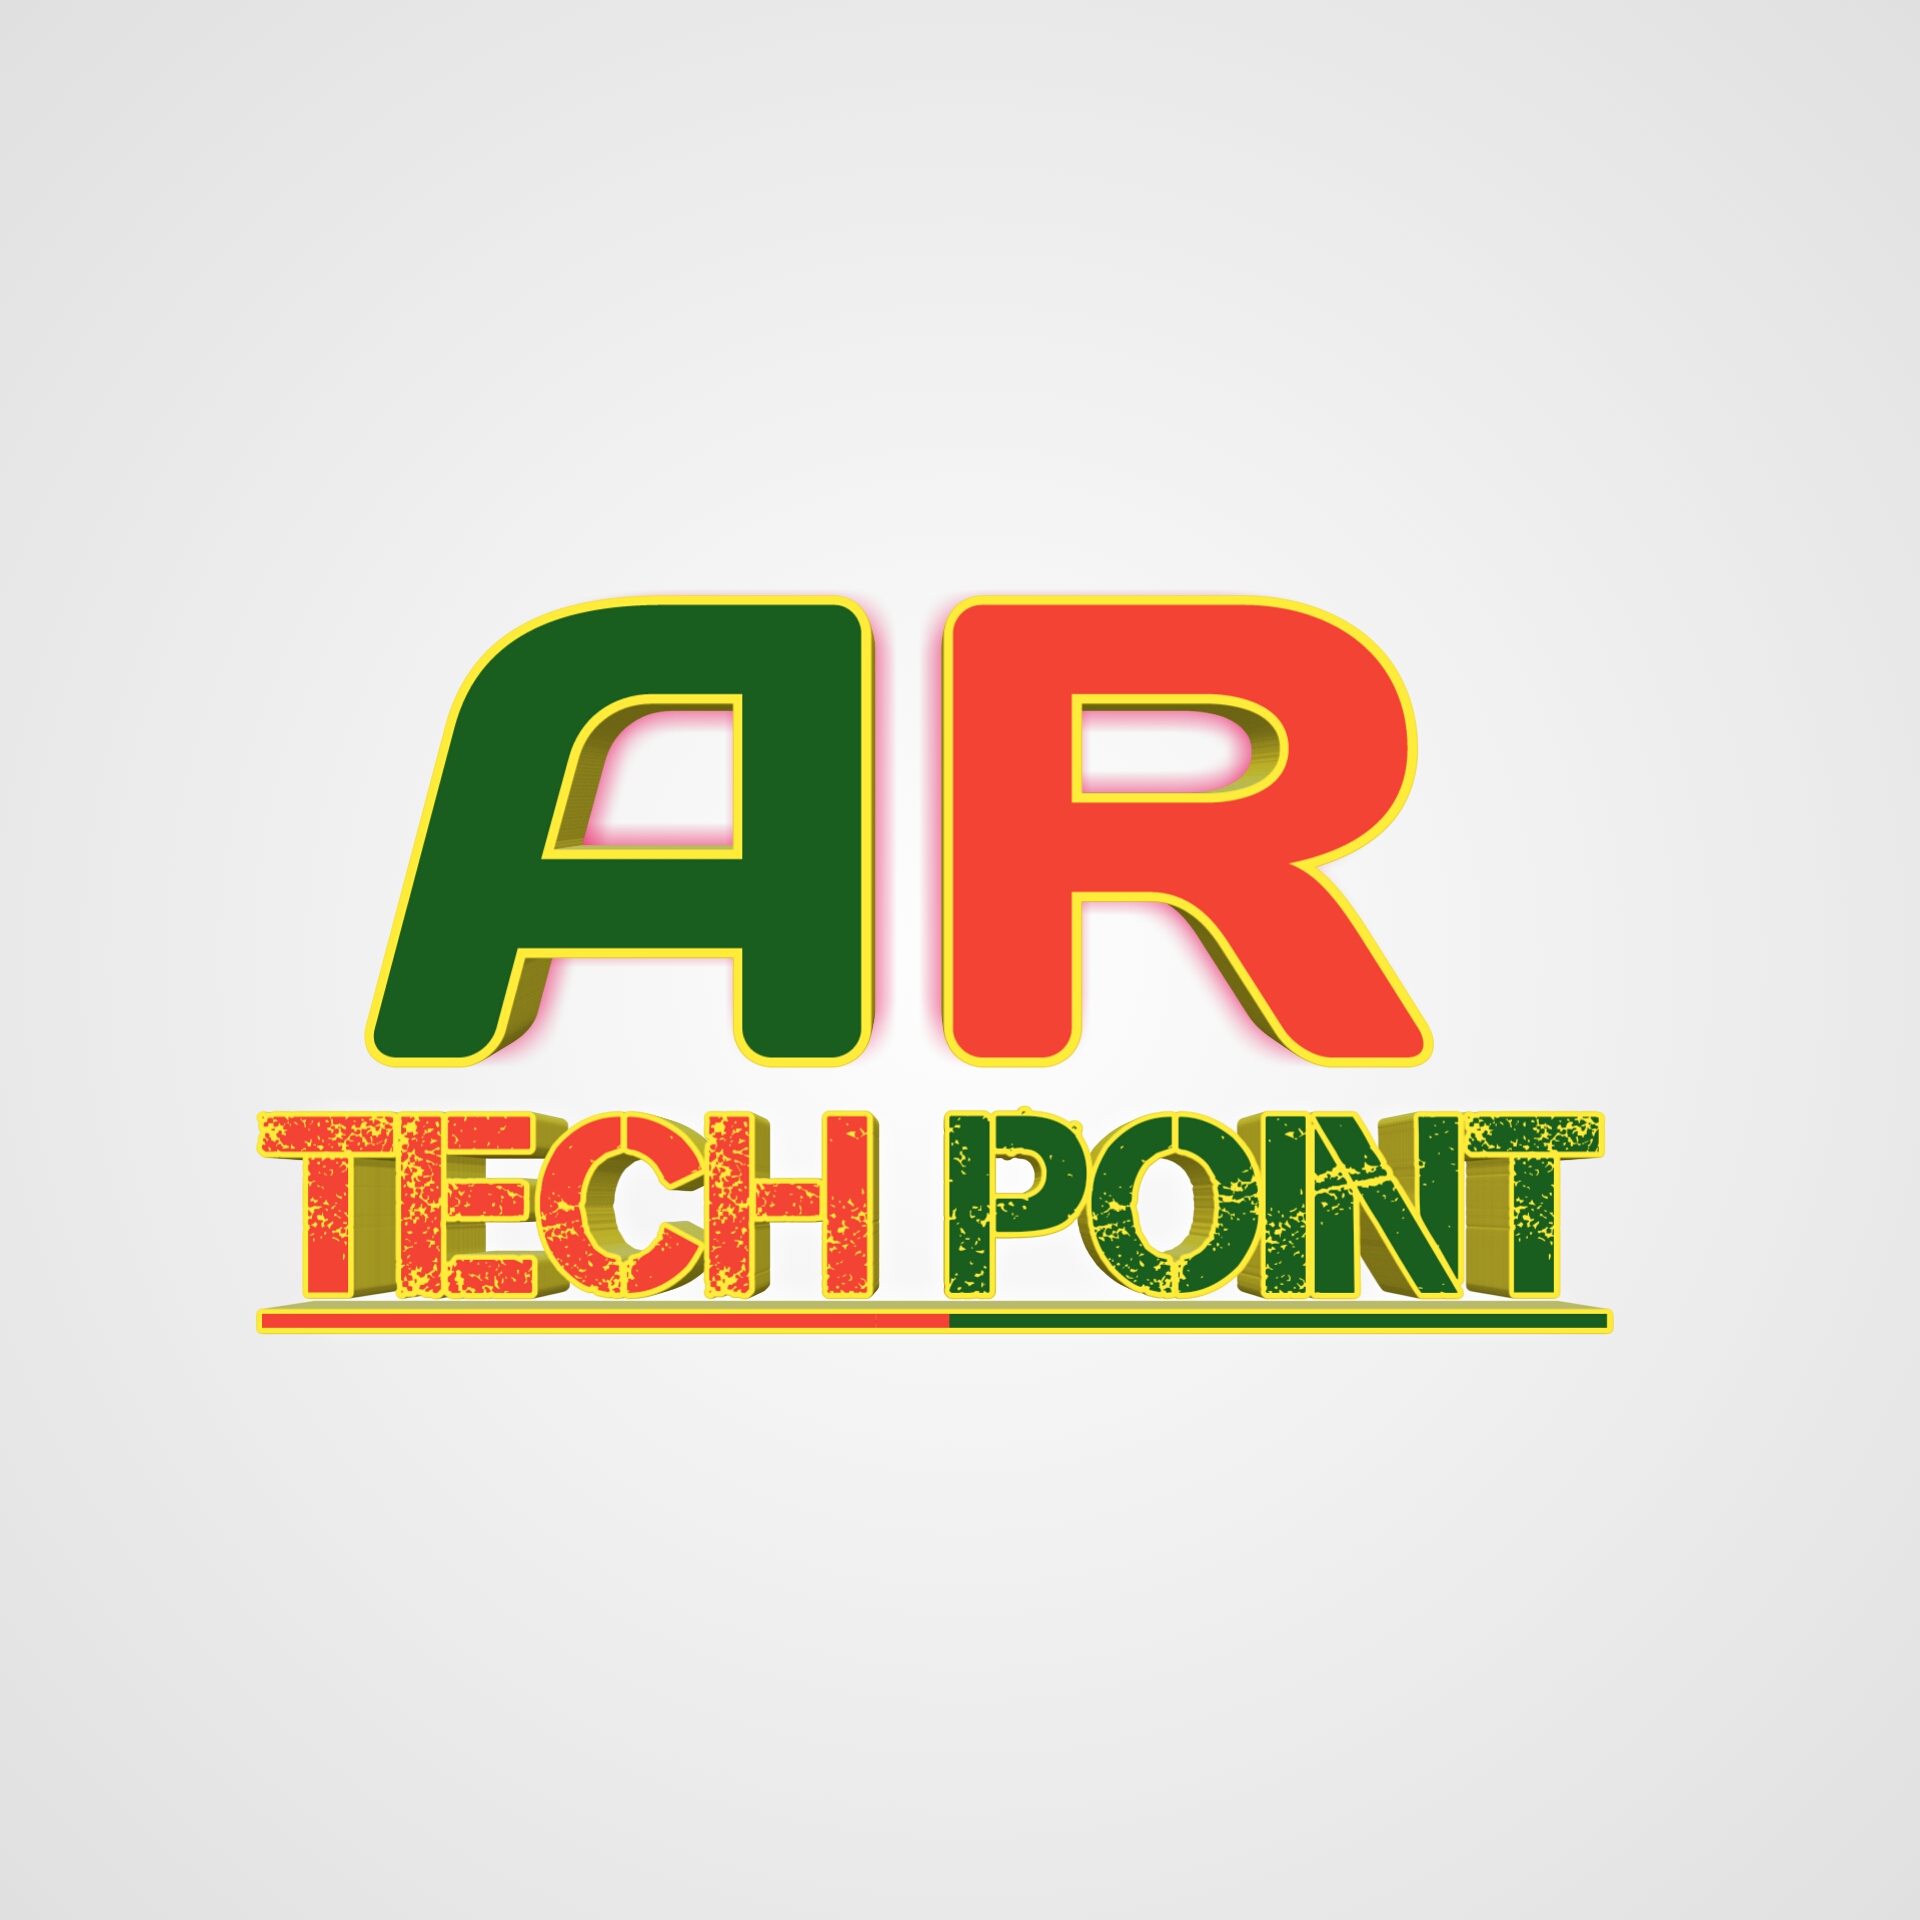 I Am A Youtuber My Small Youtube Channel Name Ar Tech Point My Channel New Logo Steemit